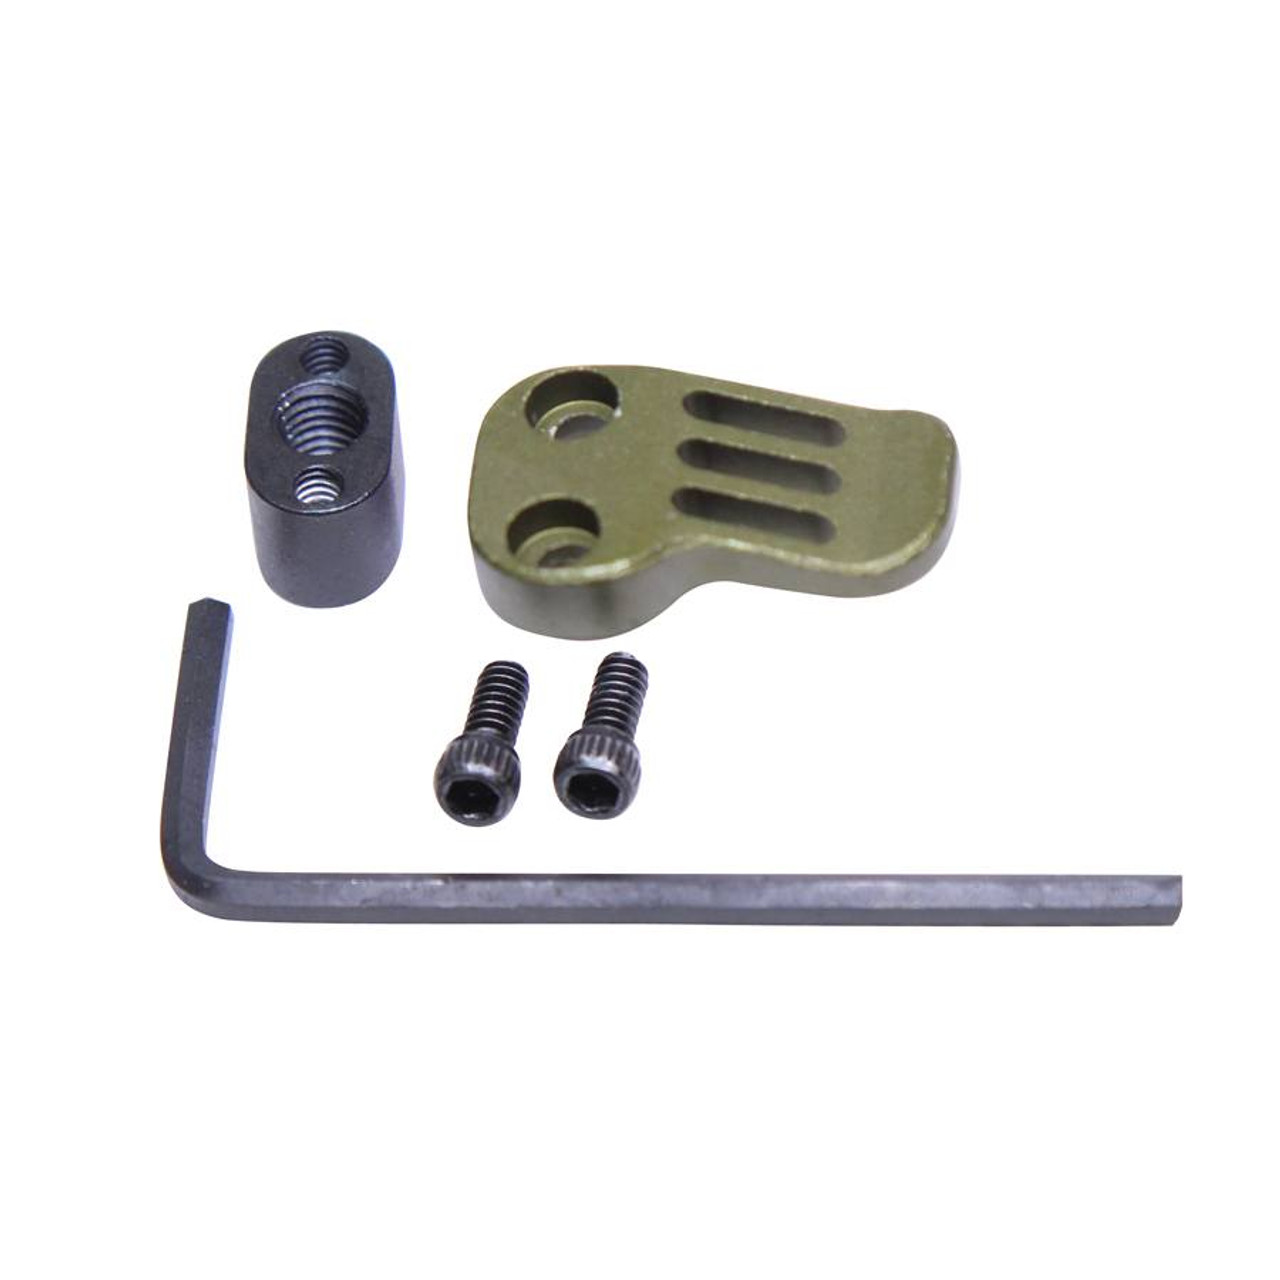 Guntec USA EXT-MC-GREEN Extended Mag Catch Paddle Release (Anodized Green)